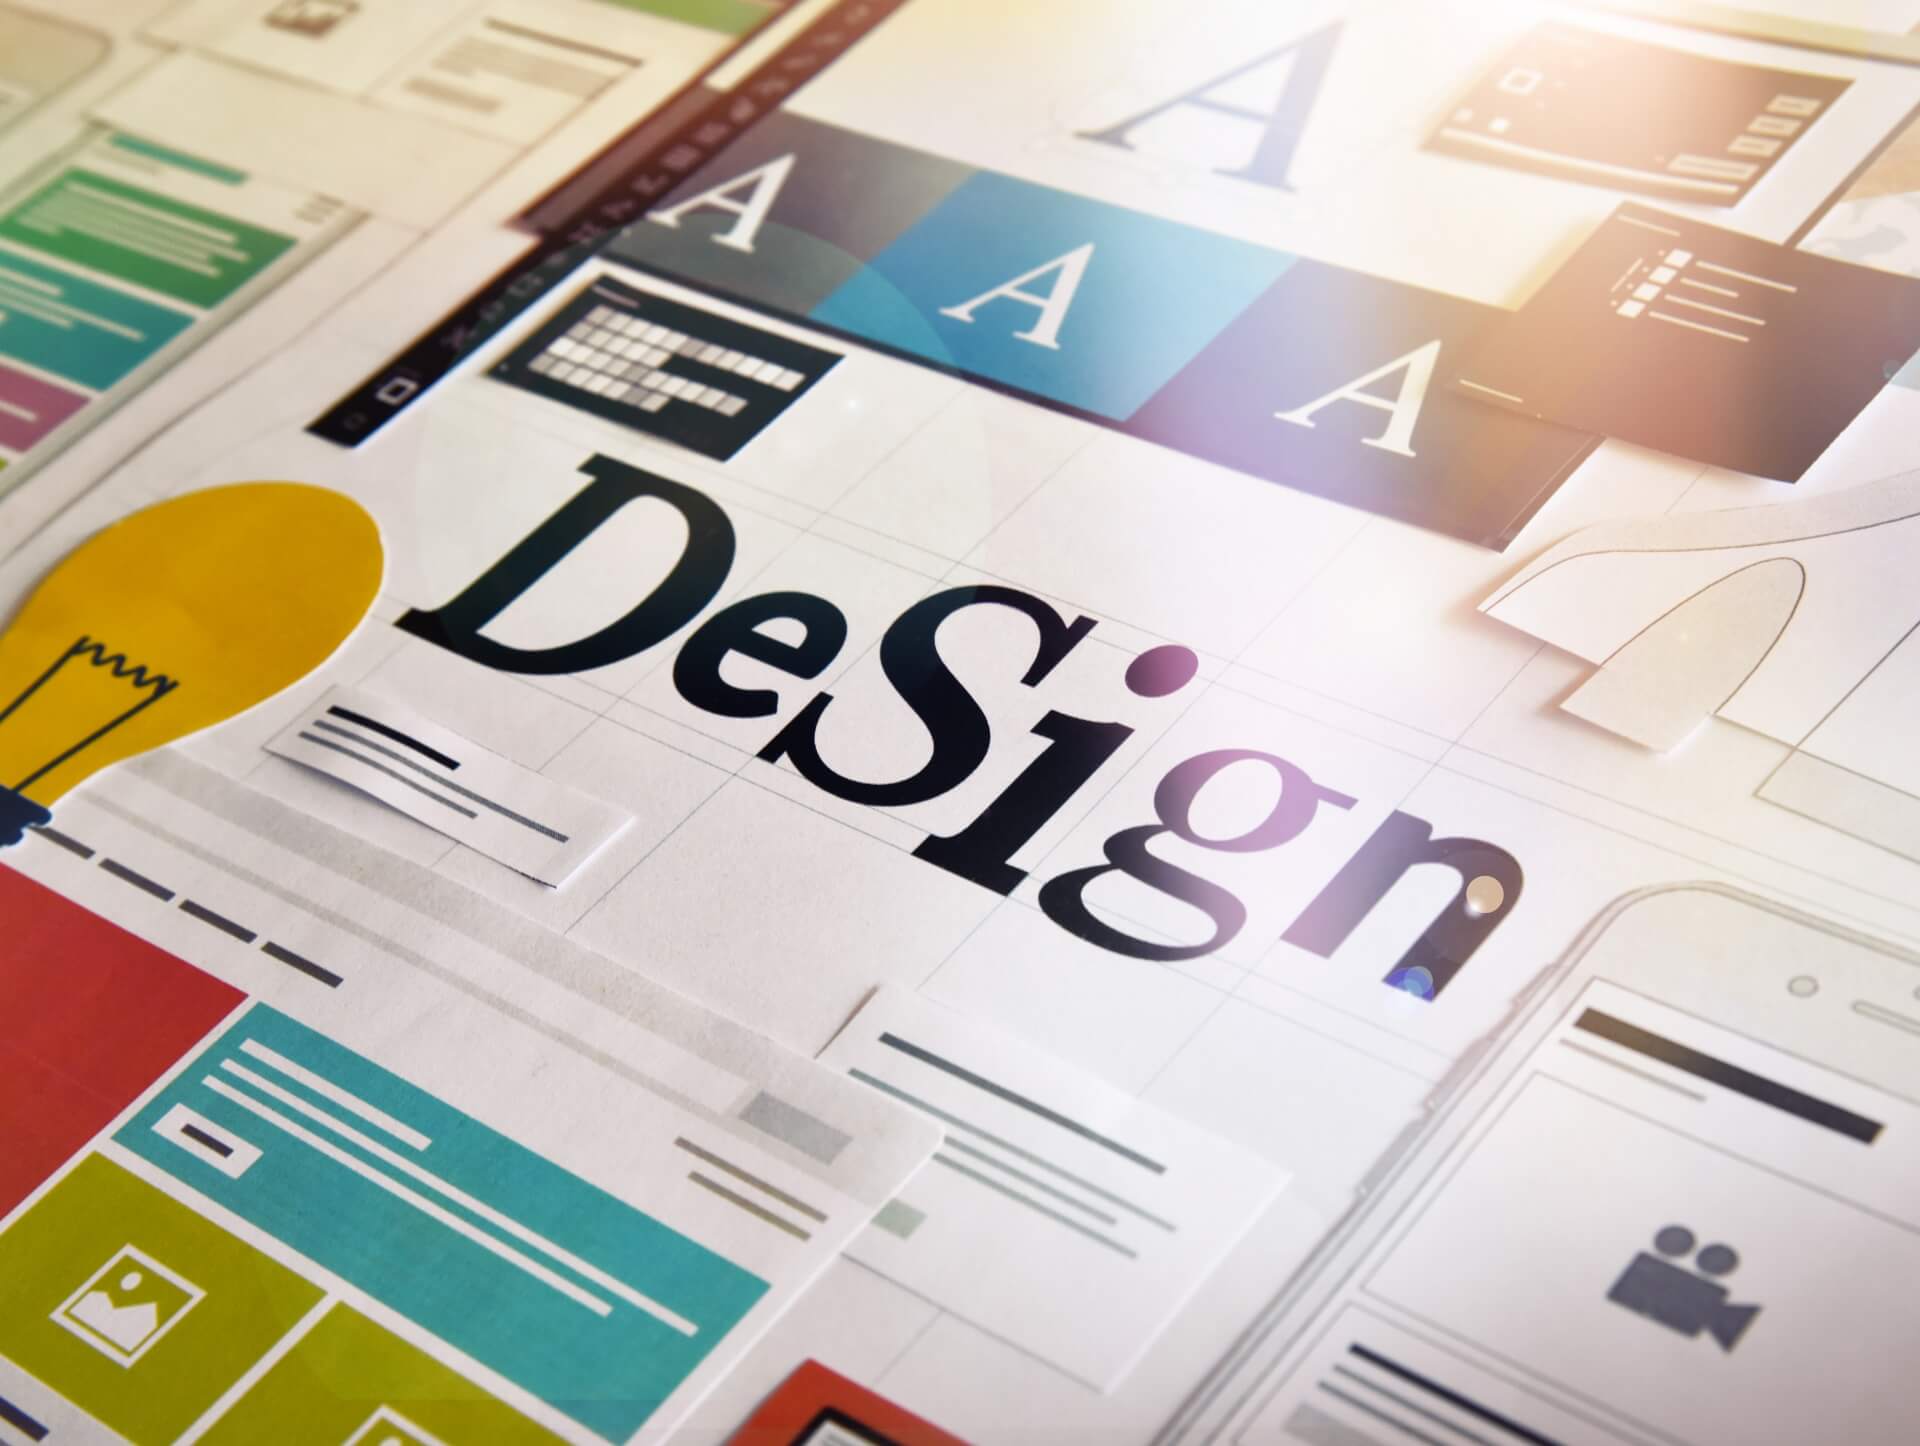 The role of graphic design in social media marketing